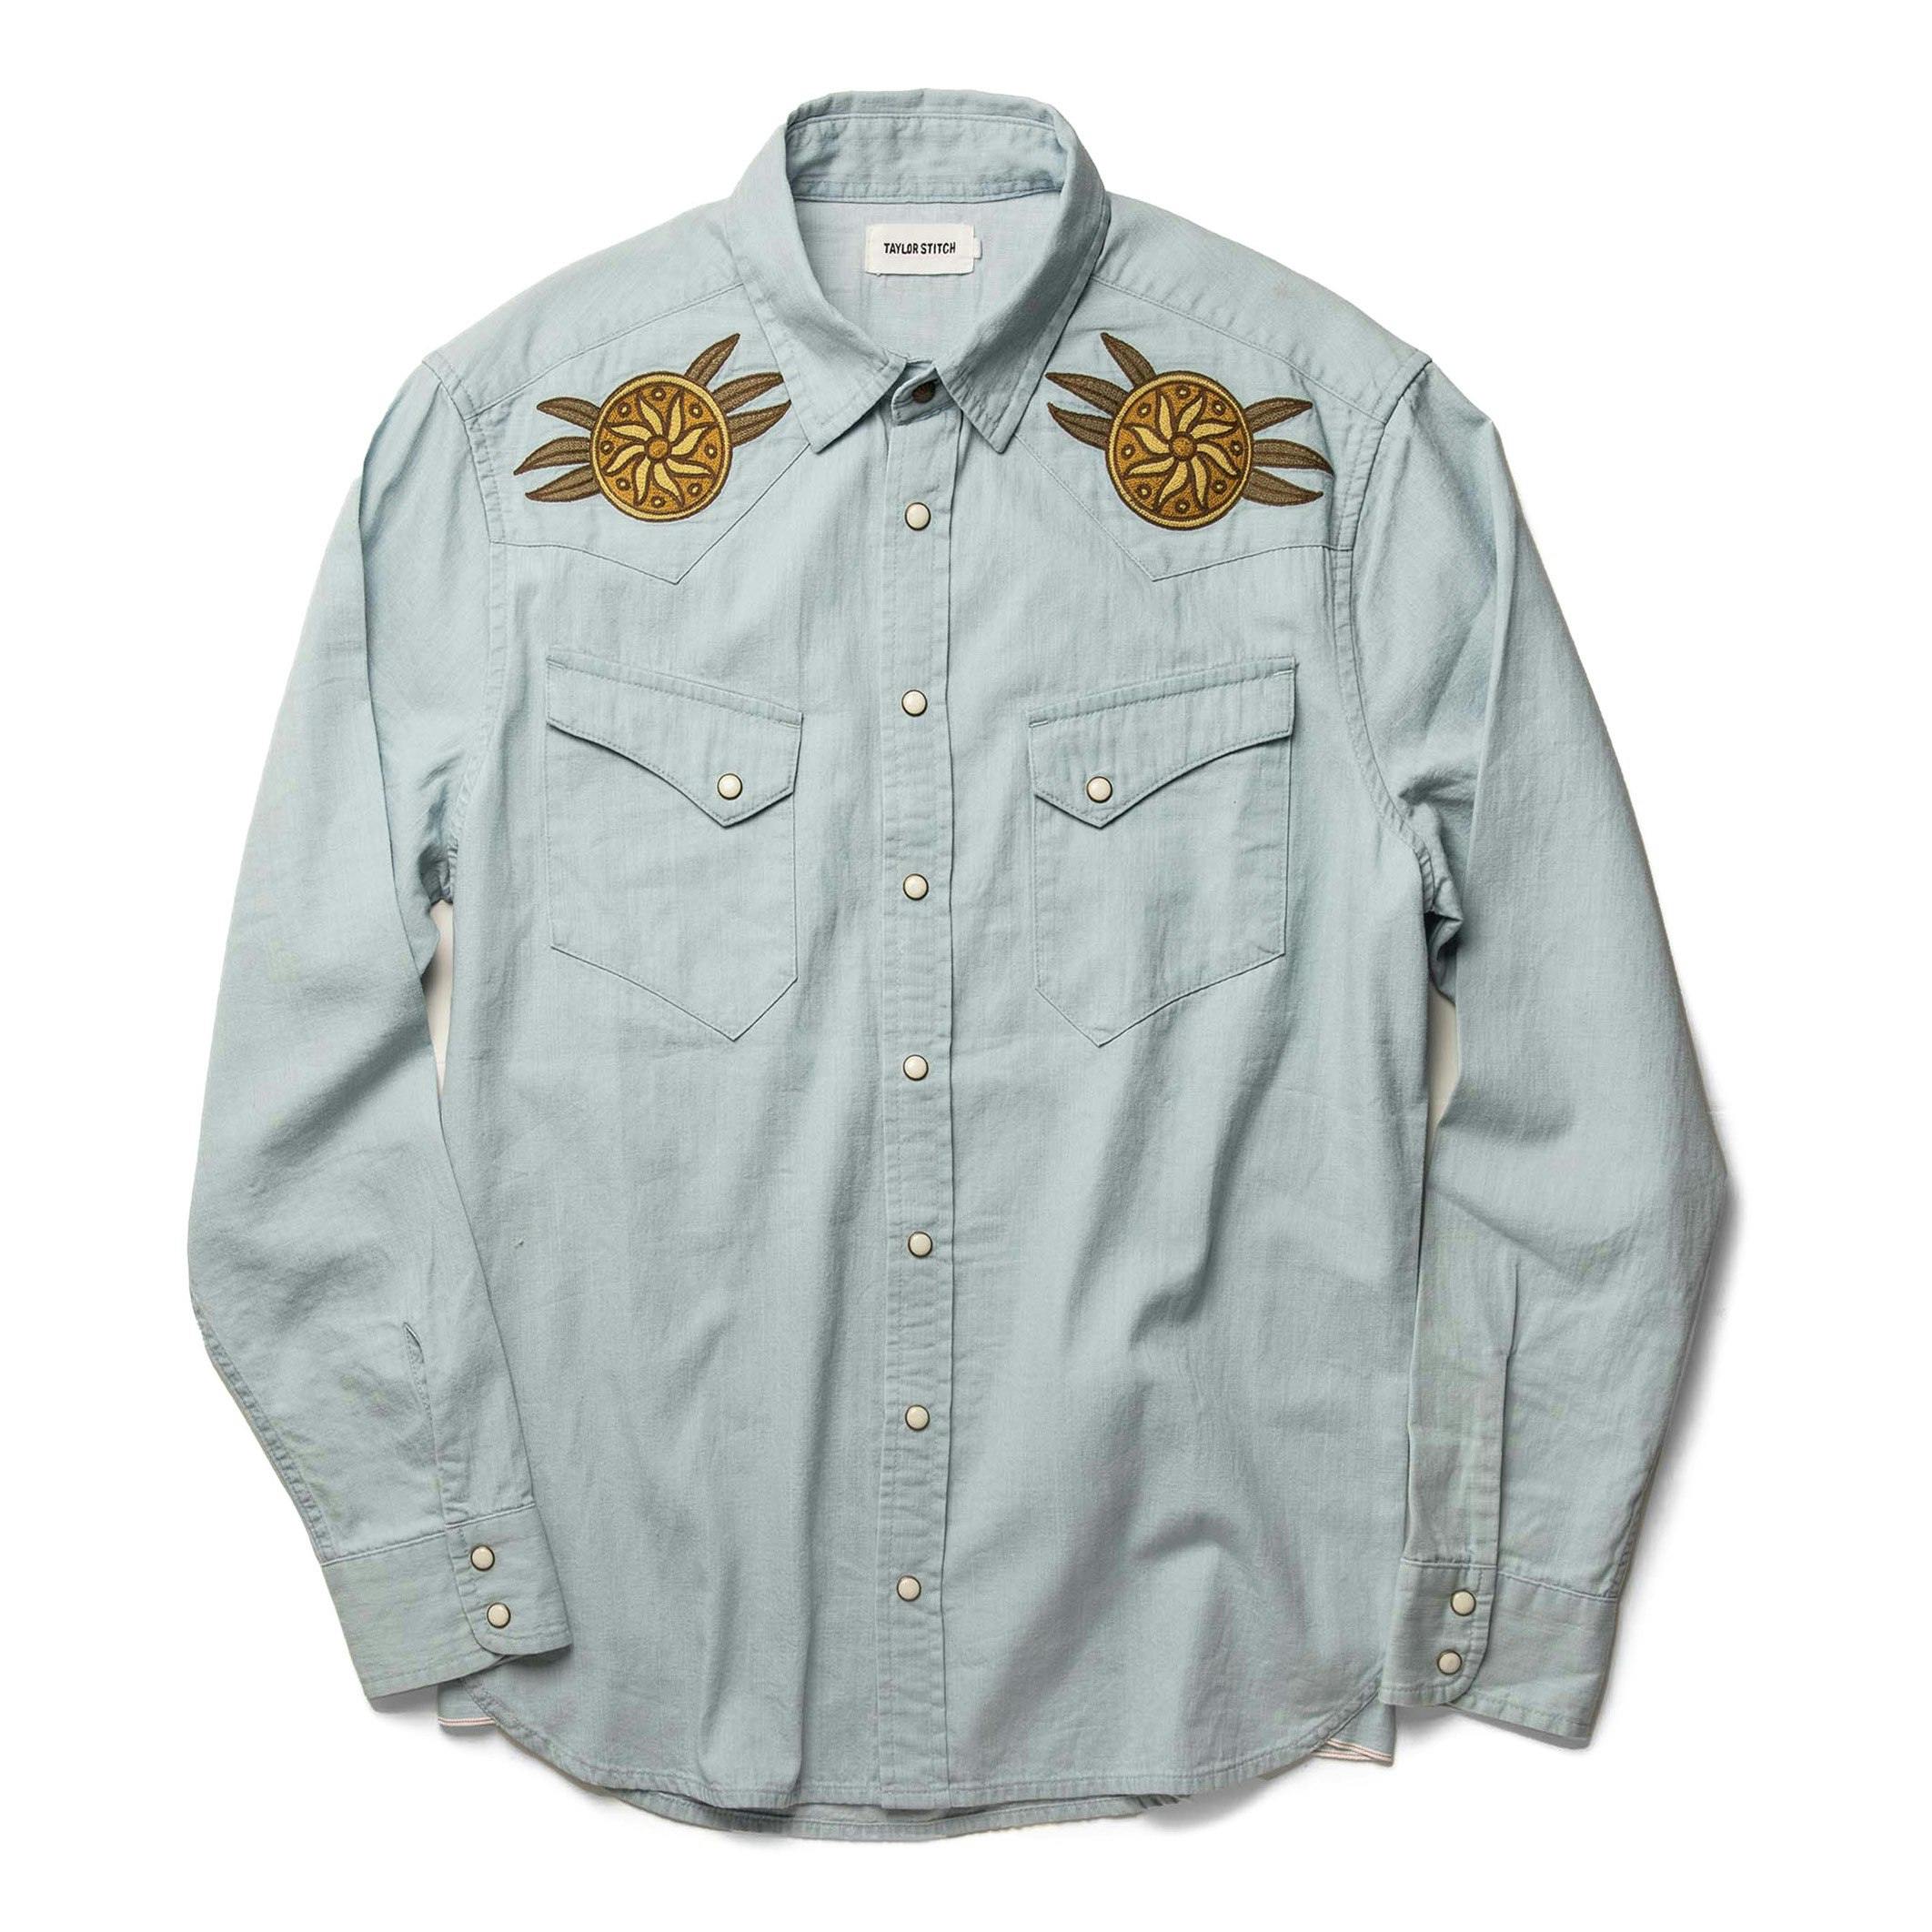 The Embroidered Western Shirt